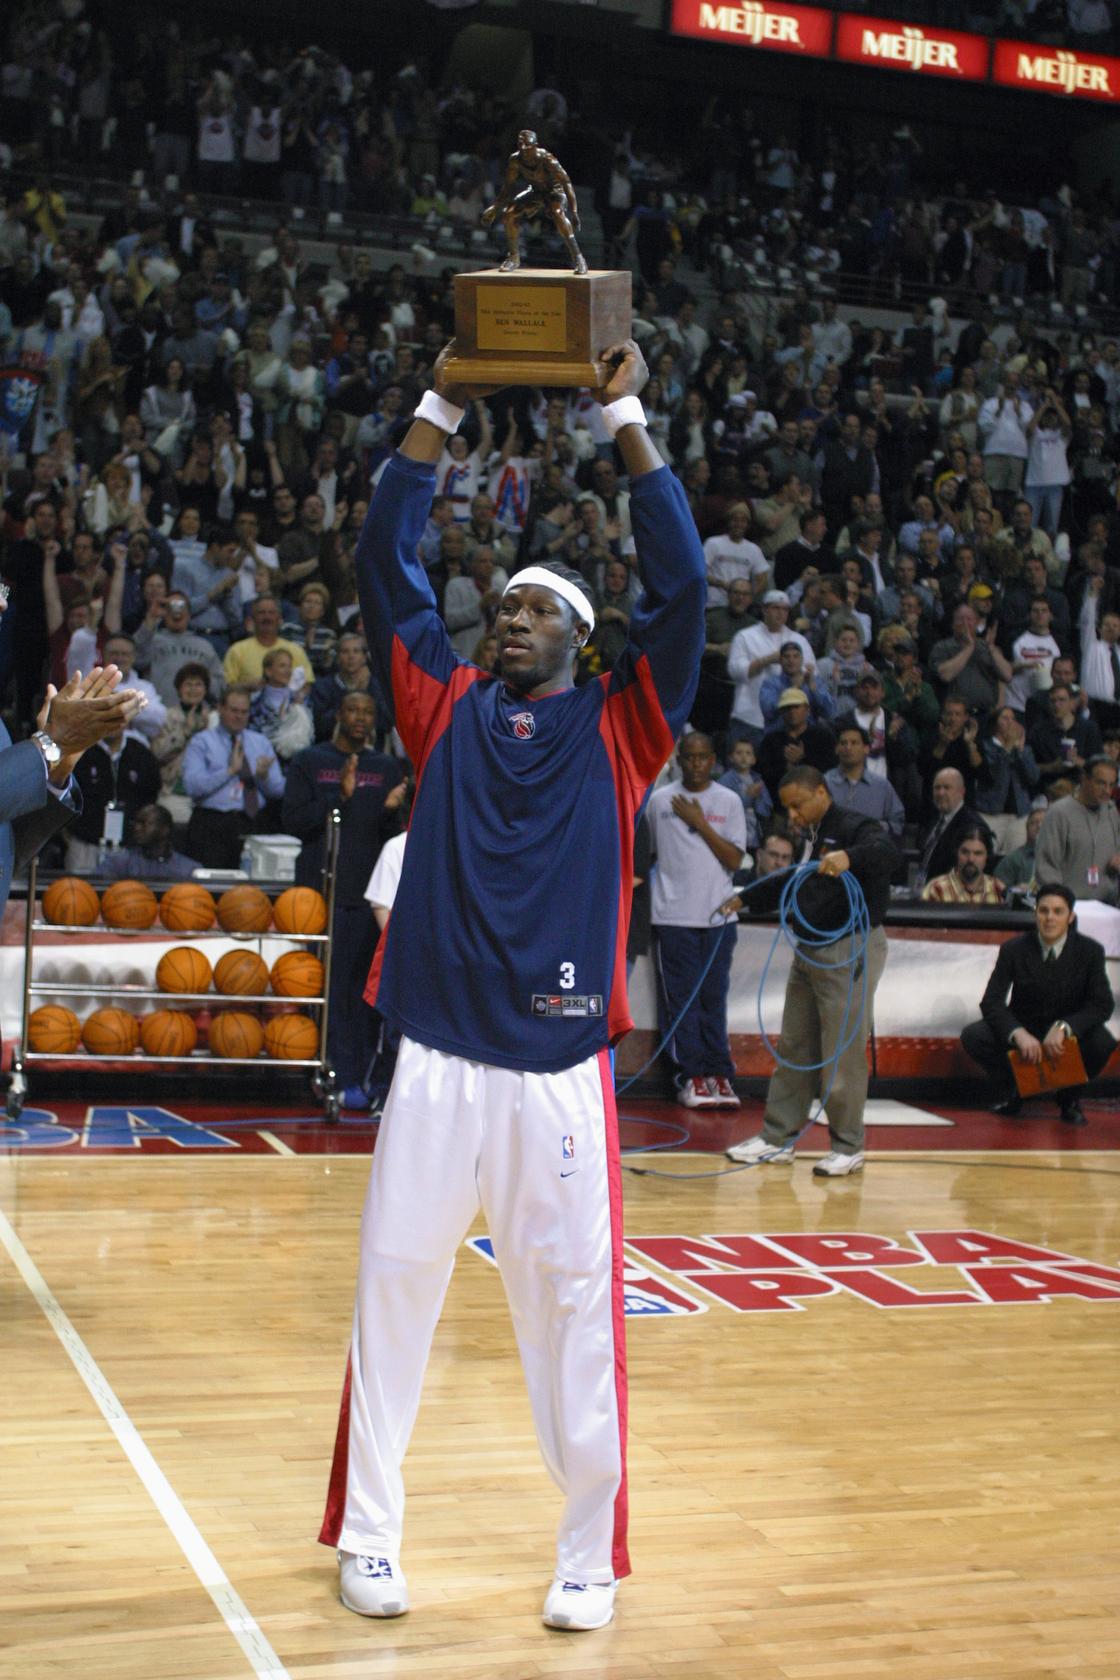 Ben Wallace has the most NBA defensive player of the year awards.